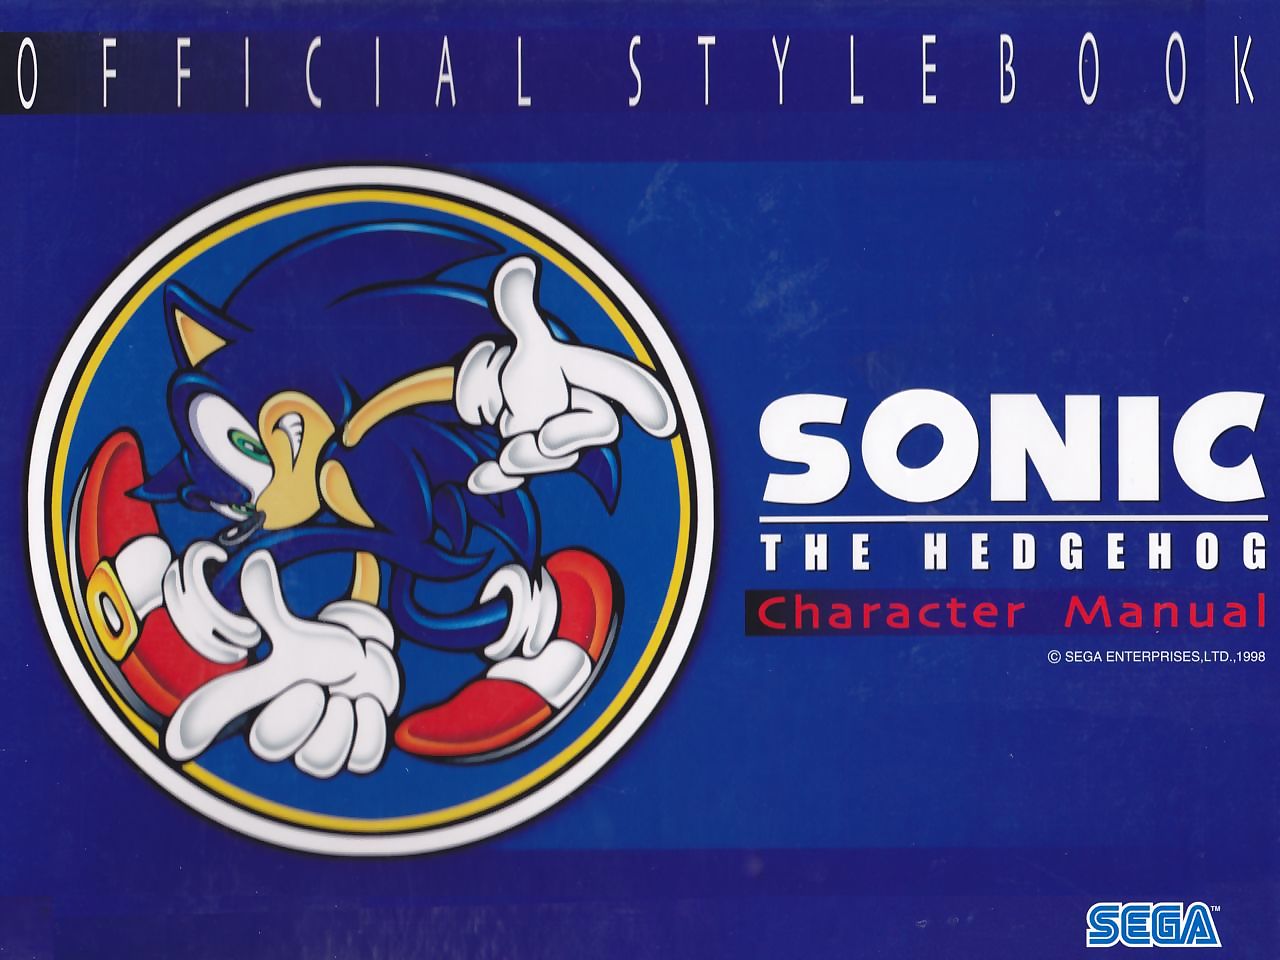 Sonic Try one\'s luck Stylebook